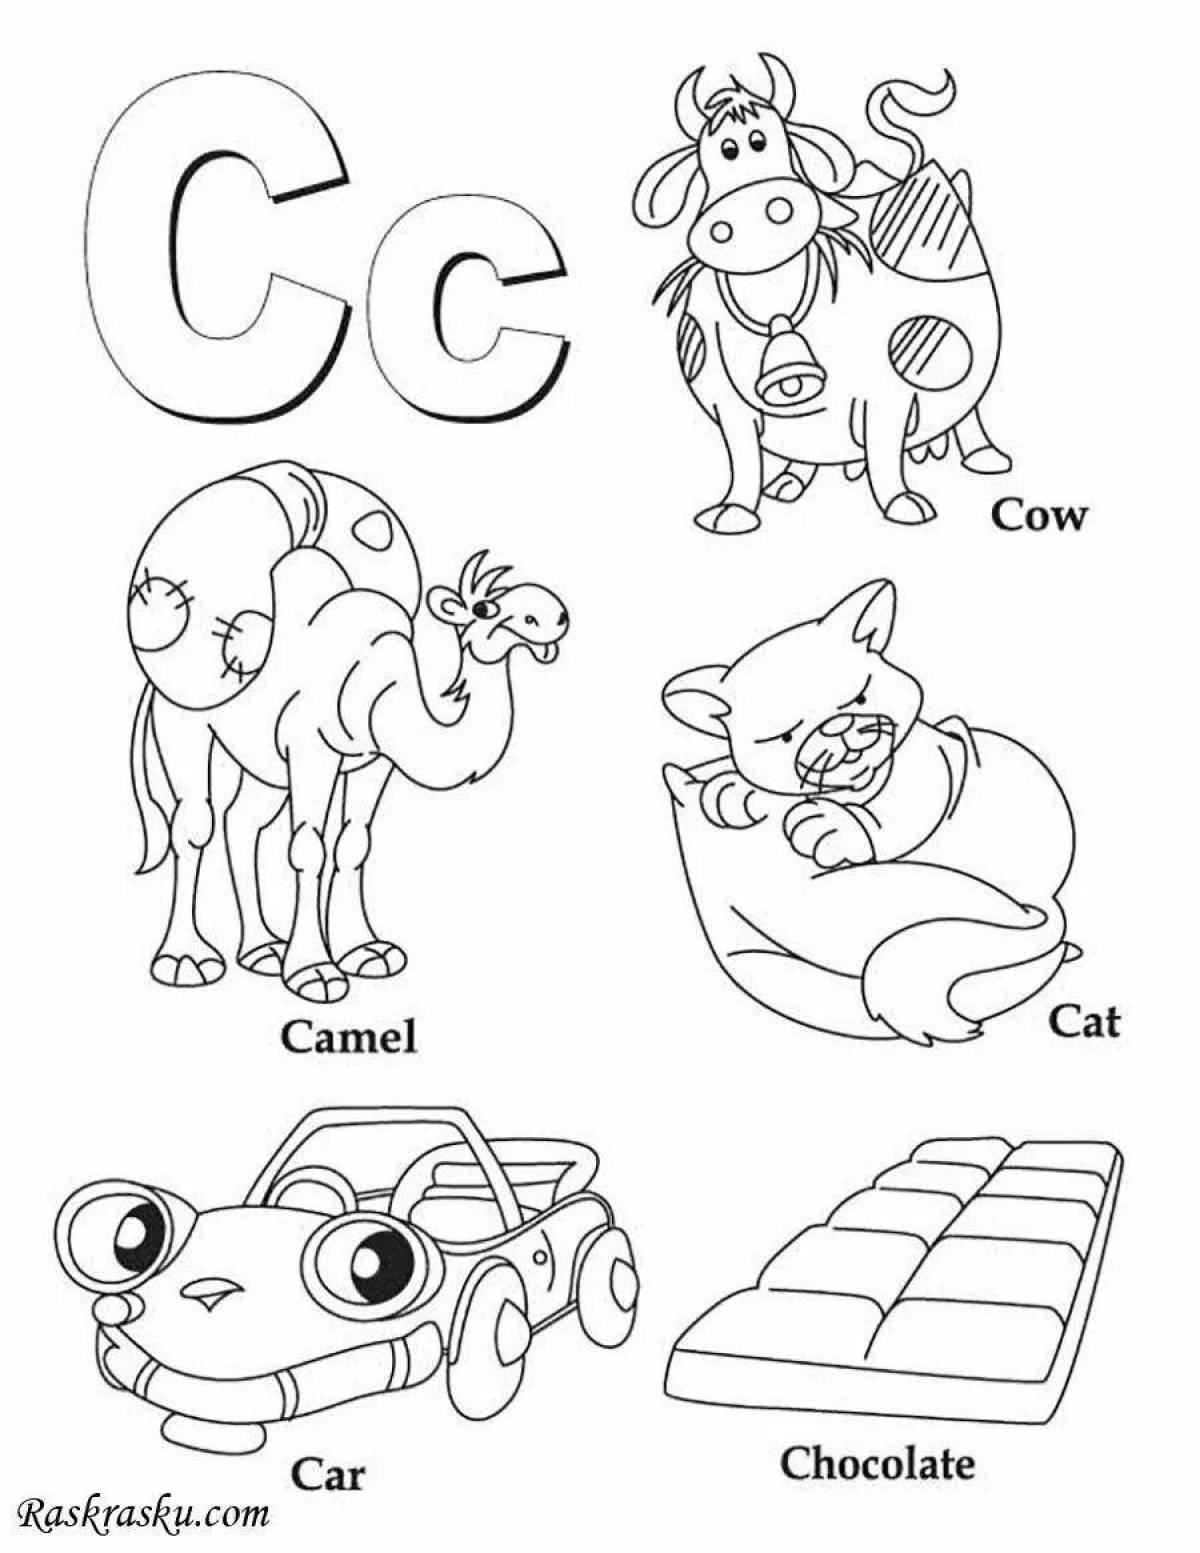 Odious evil alphabet coloring book